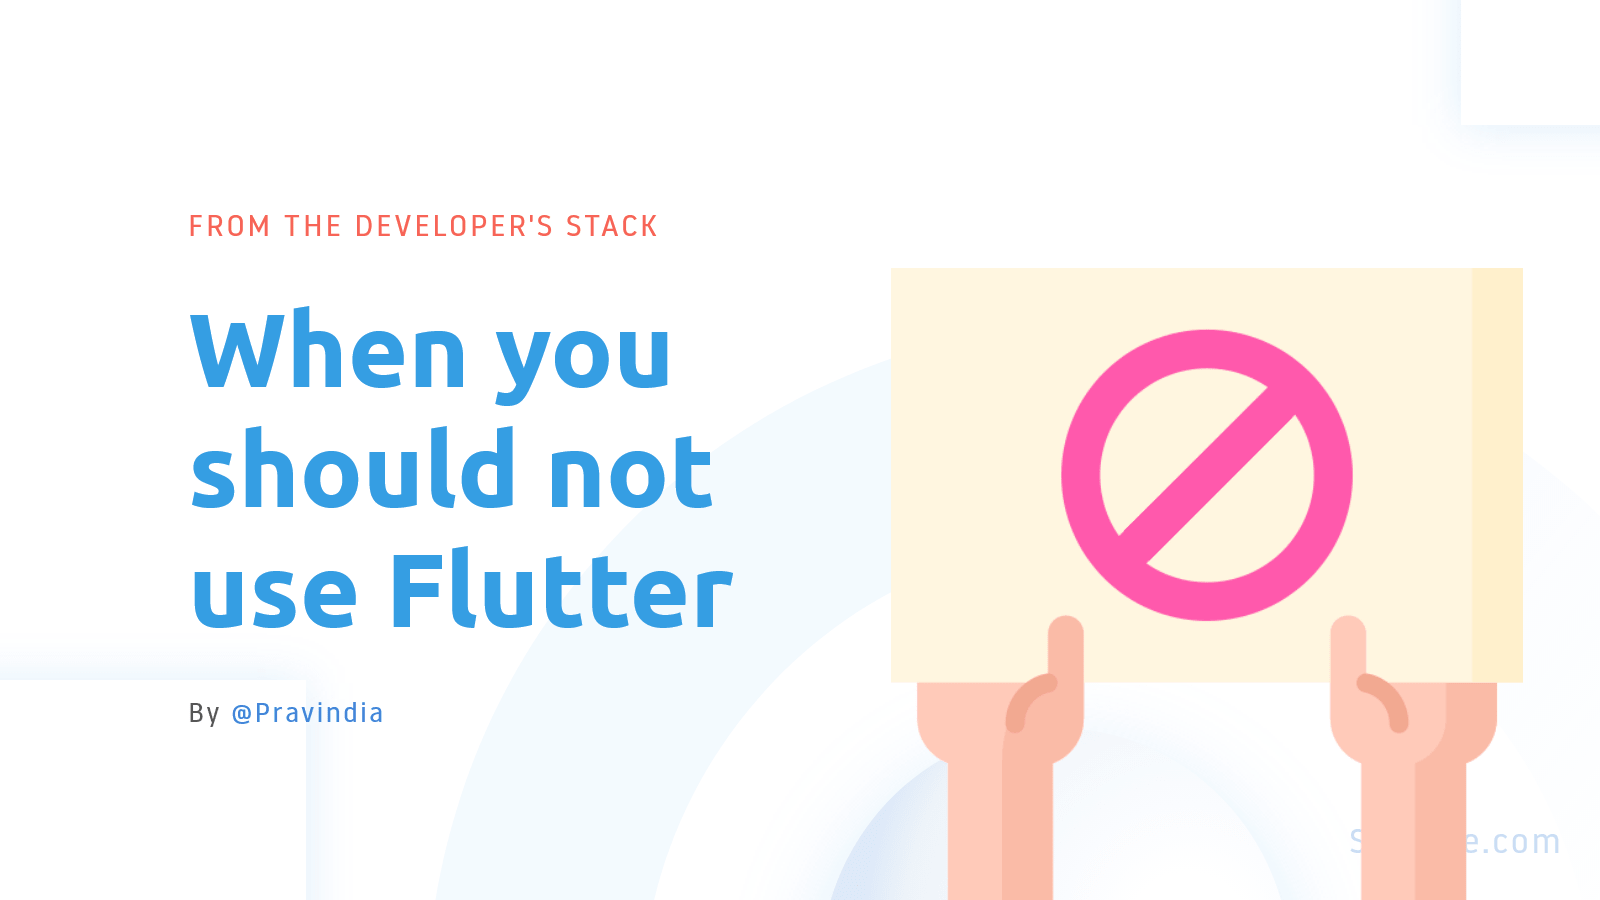 When not to use Flutter